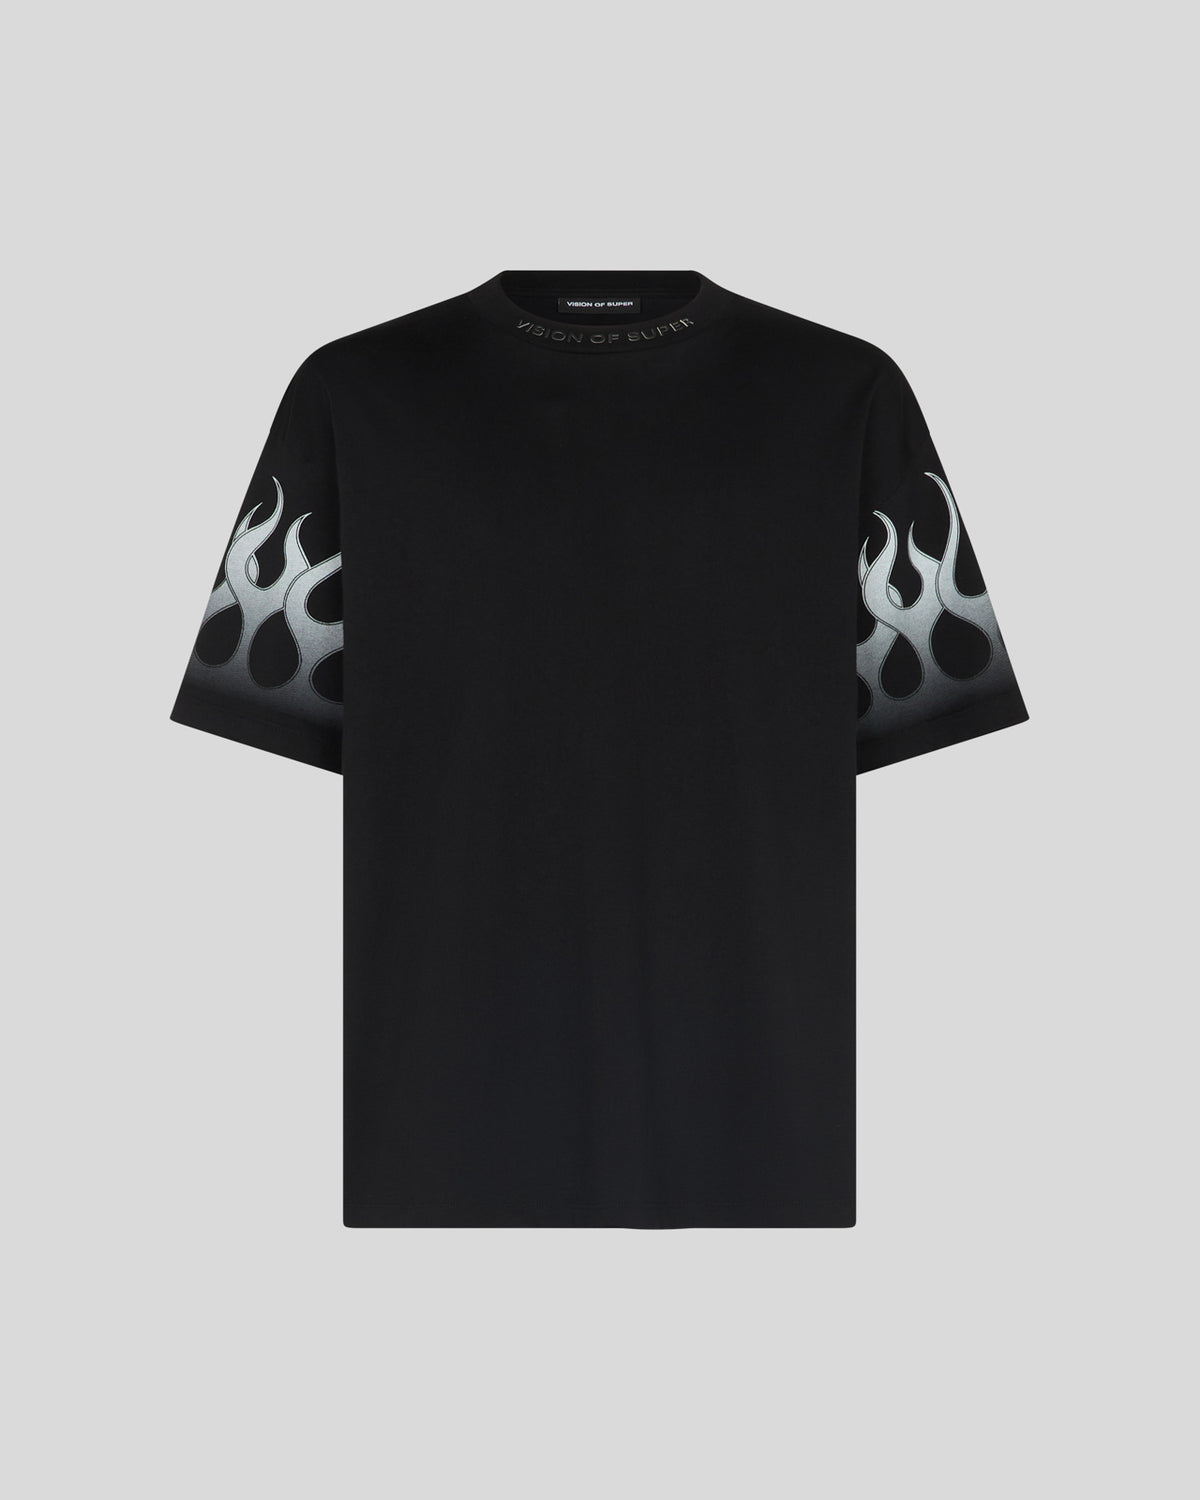 VISION OF SUPER BLACK TSHIRT WITH WHITE RACING FLAMES